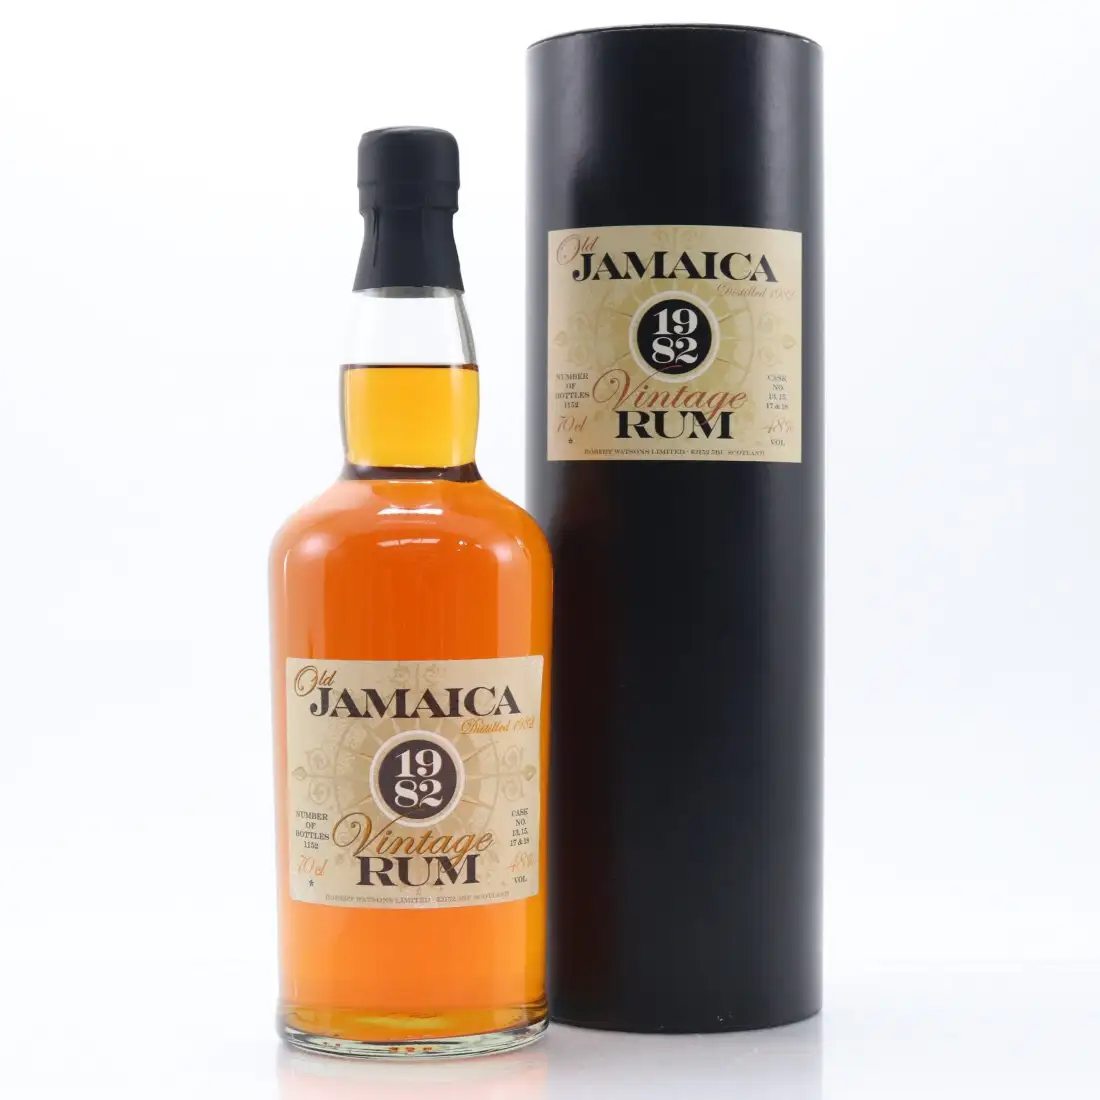 Image of the front of the bottle of the rum Old Jamaica Vintage Single Cask Rum